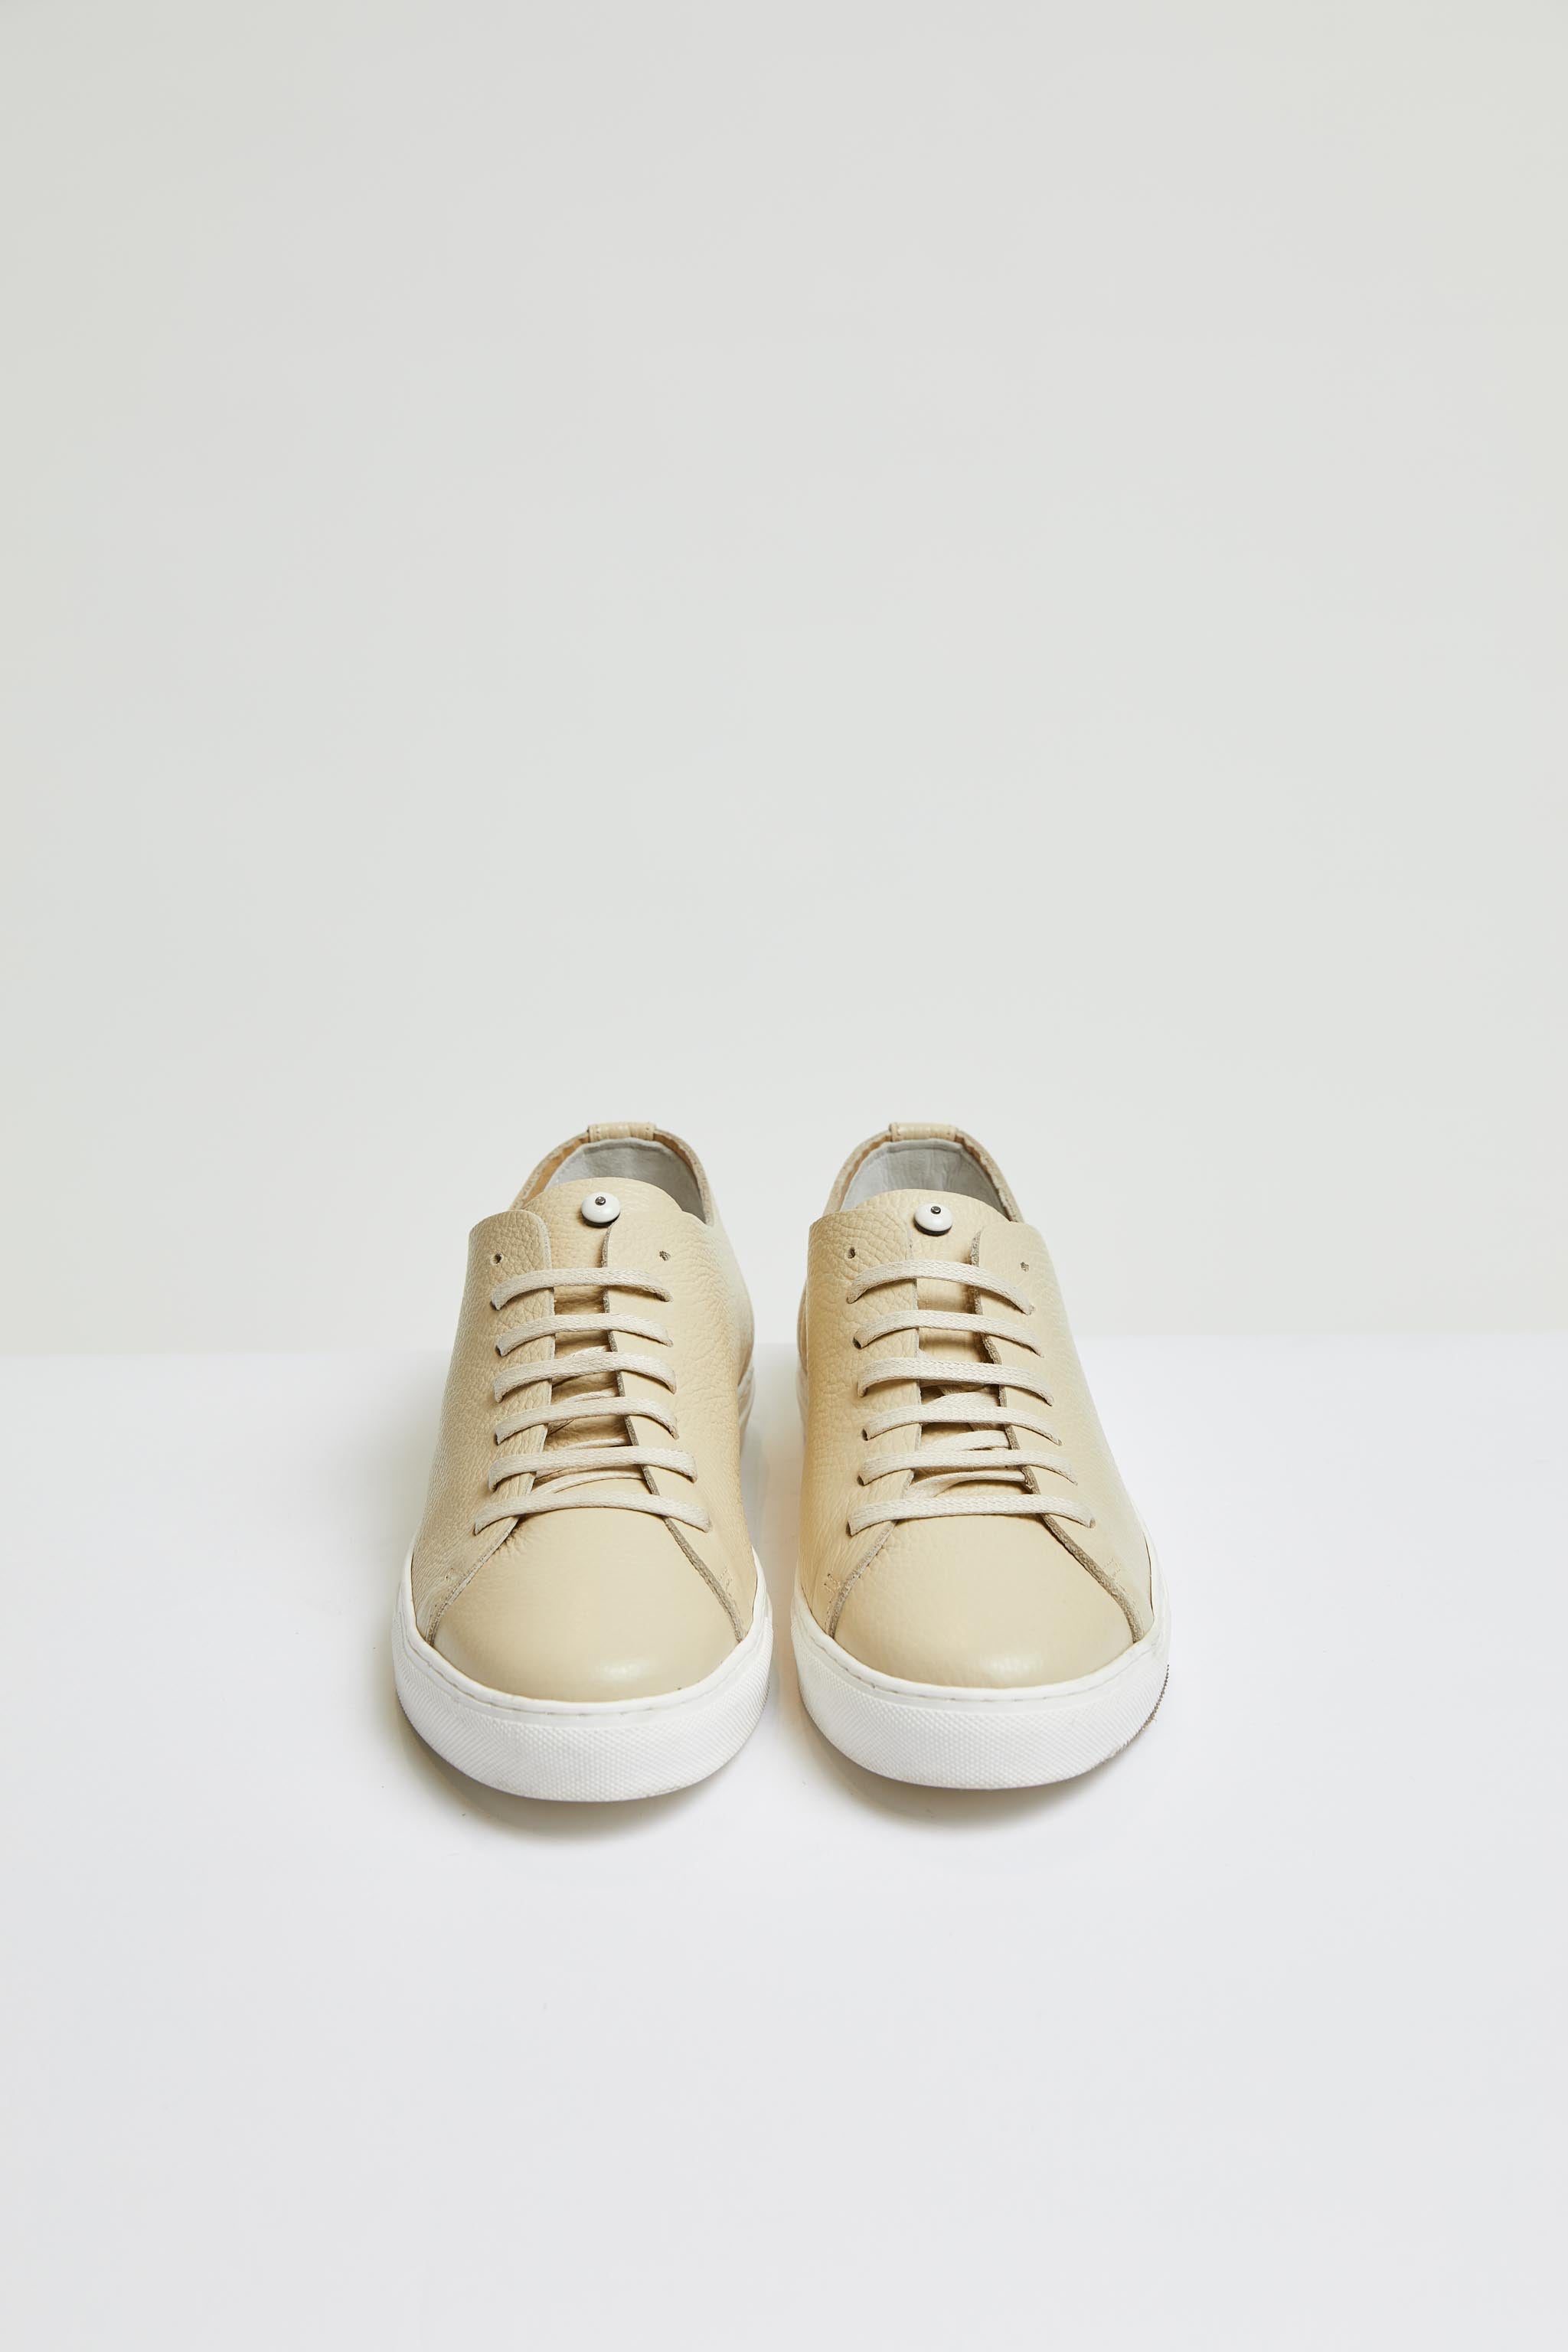 Perforated leather sneaker in beige